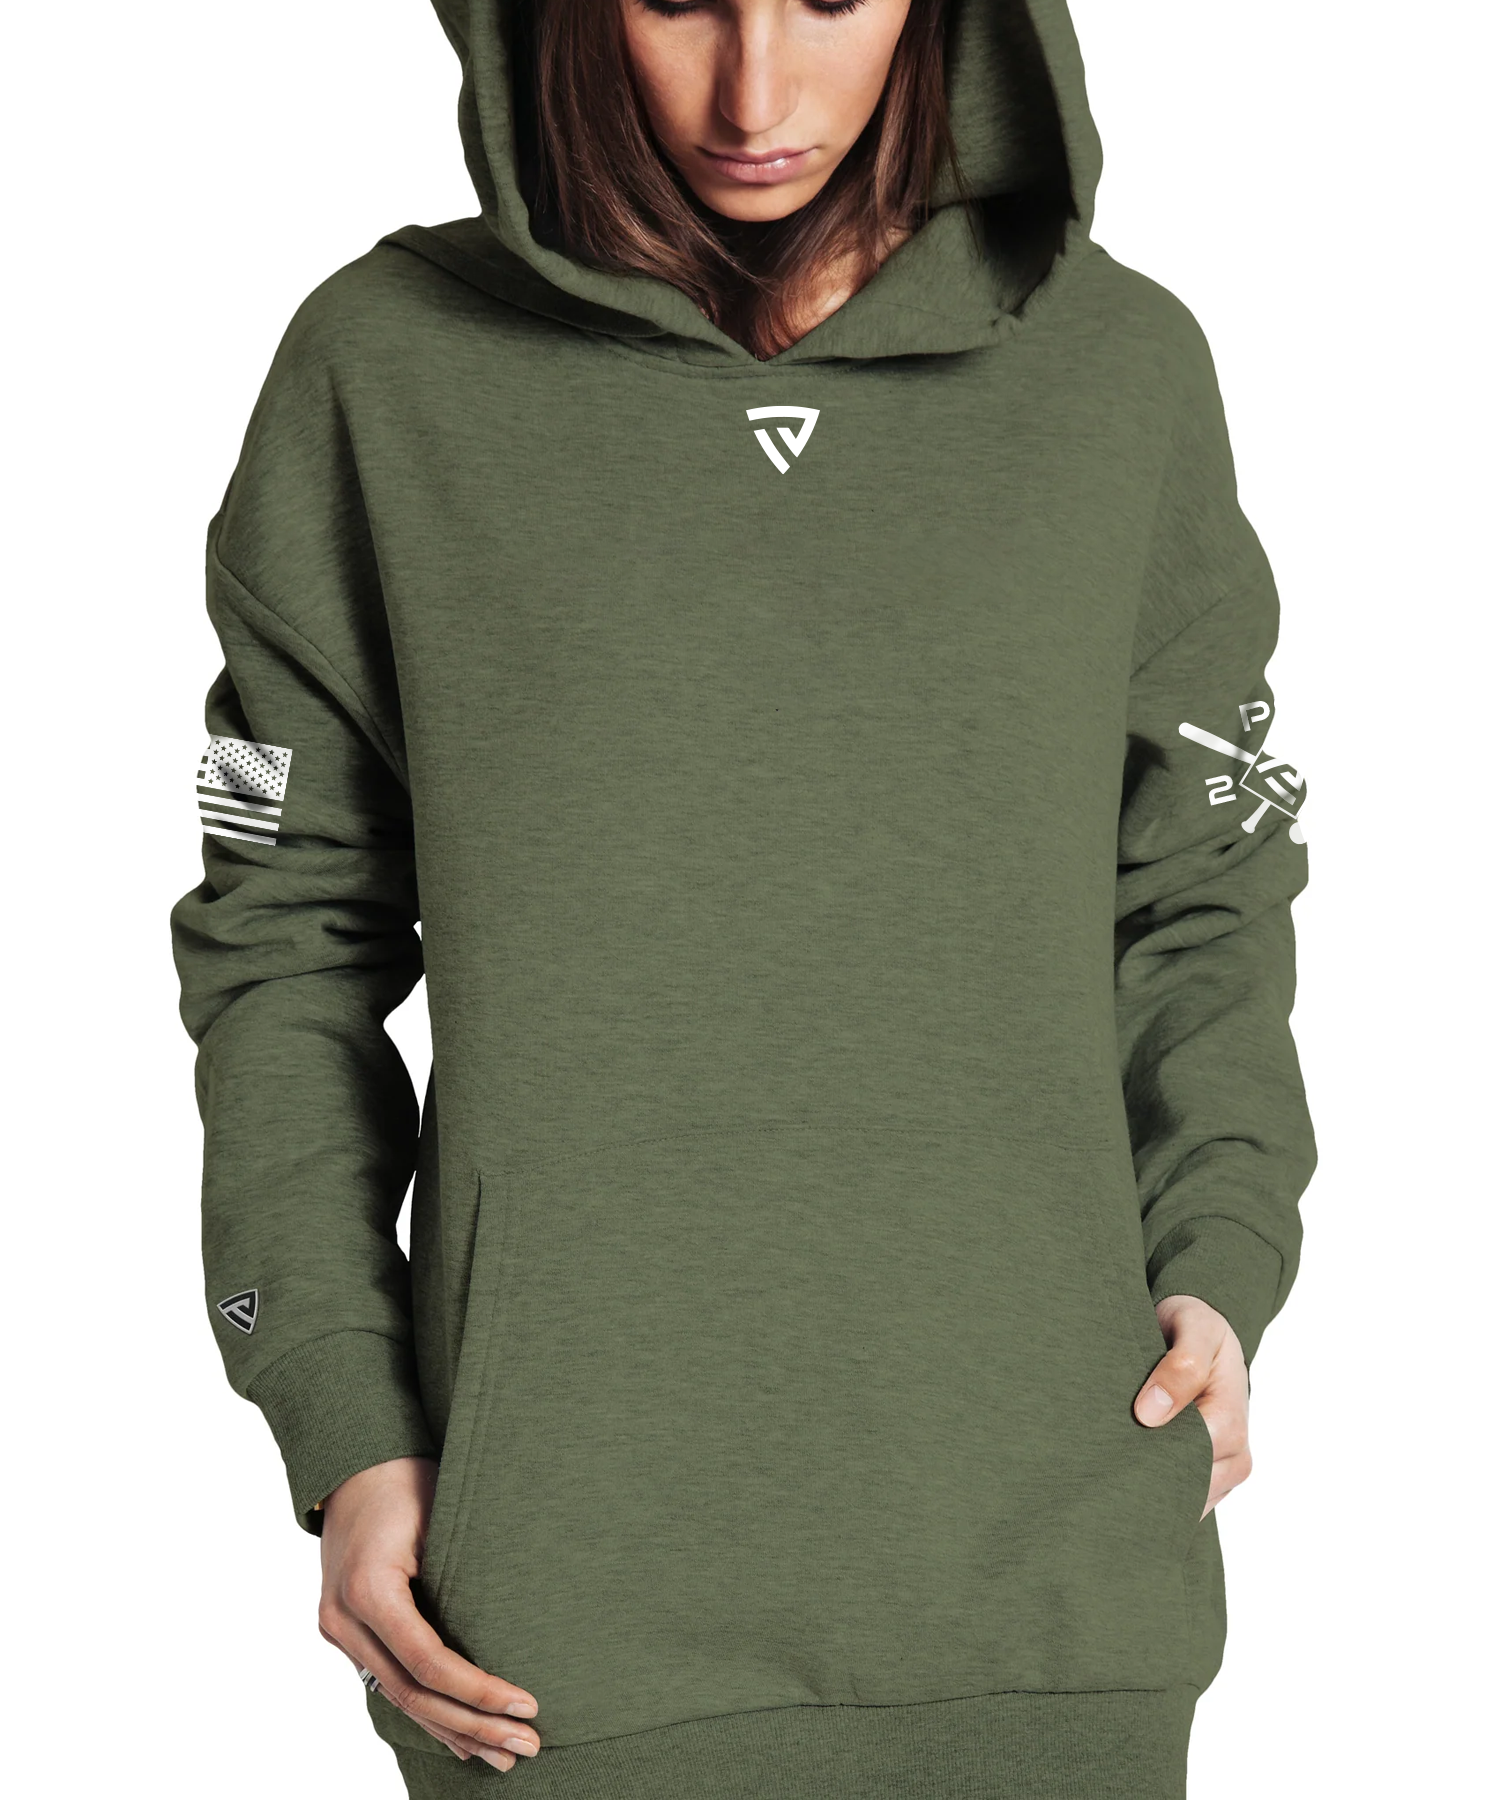 Women's Freedom Is Not Free X PS20 Military Green Hoodie